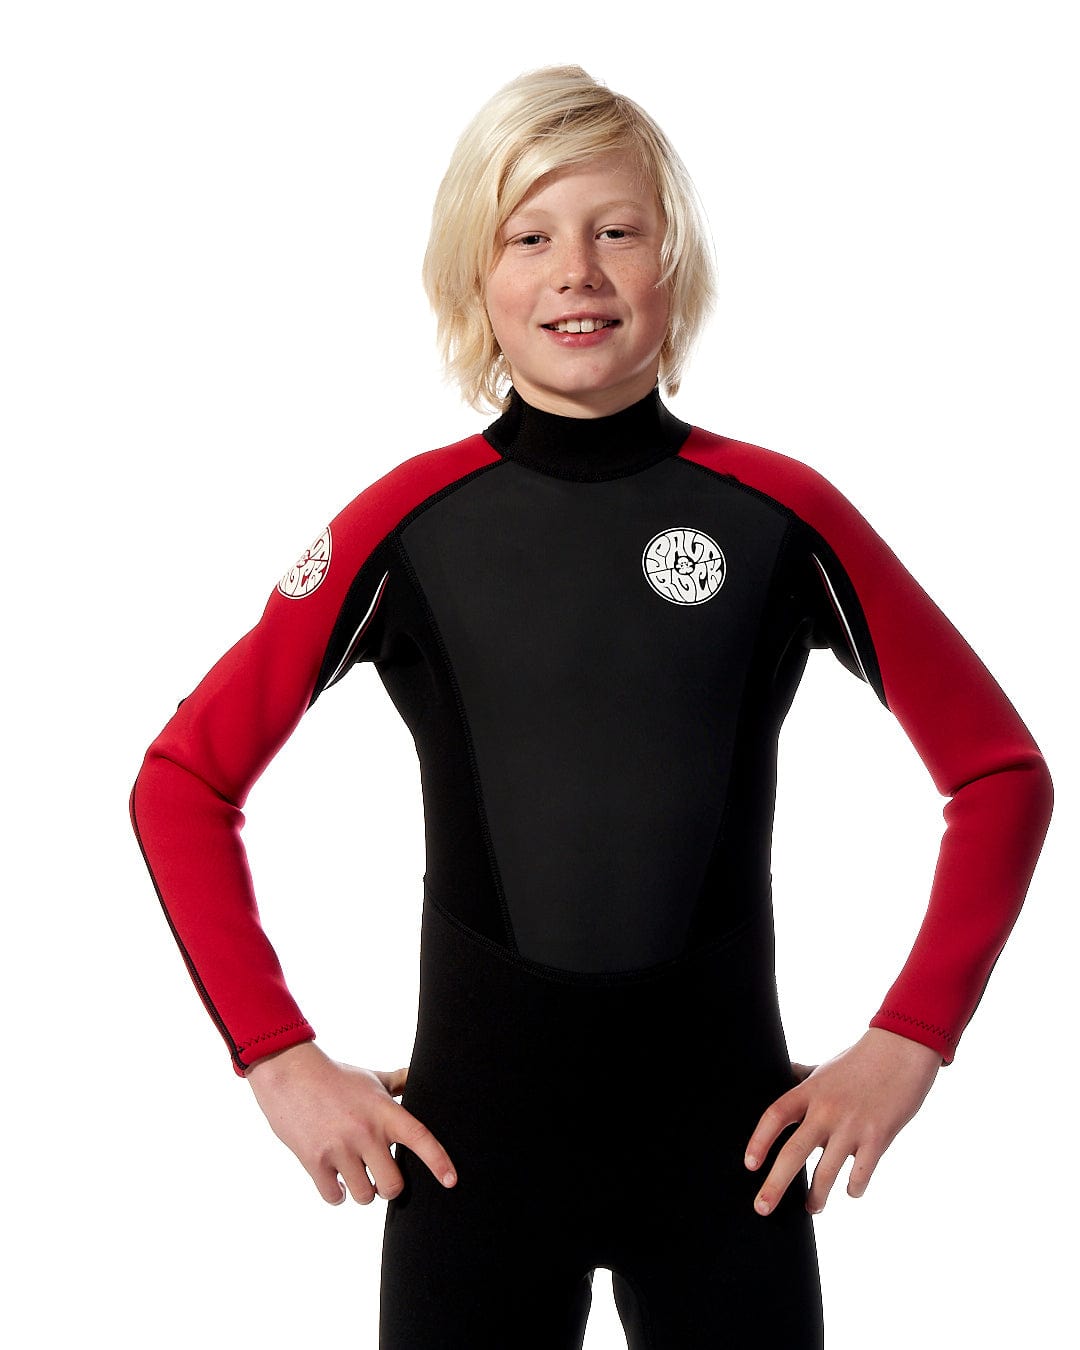 A young boy in a Saltrock Core - Kids 3/2 Full Wetsuit - Black/Red posing for a photo.